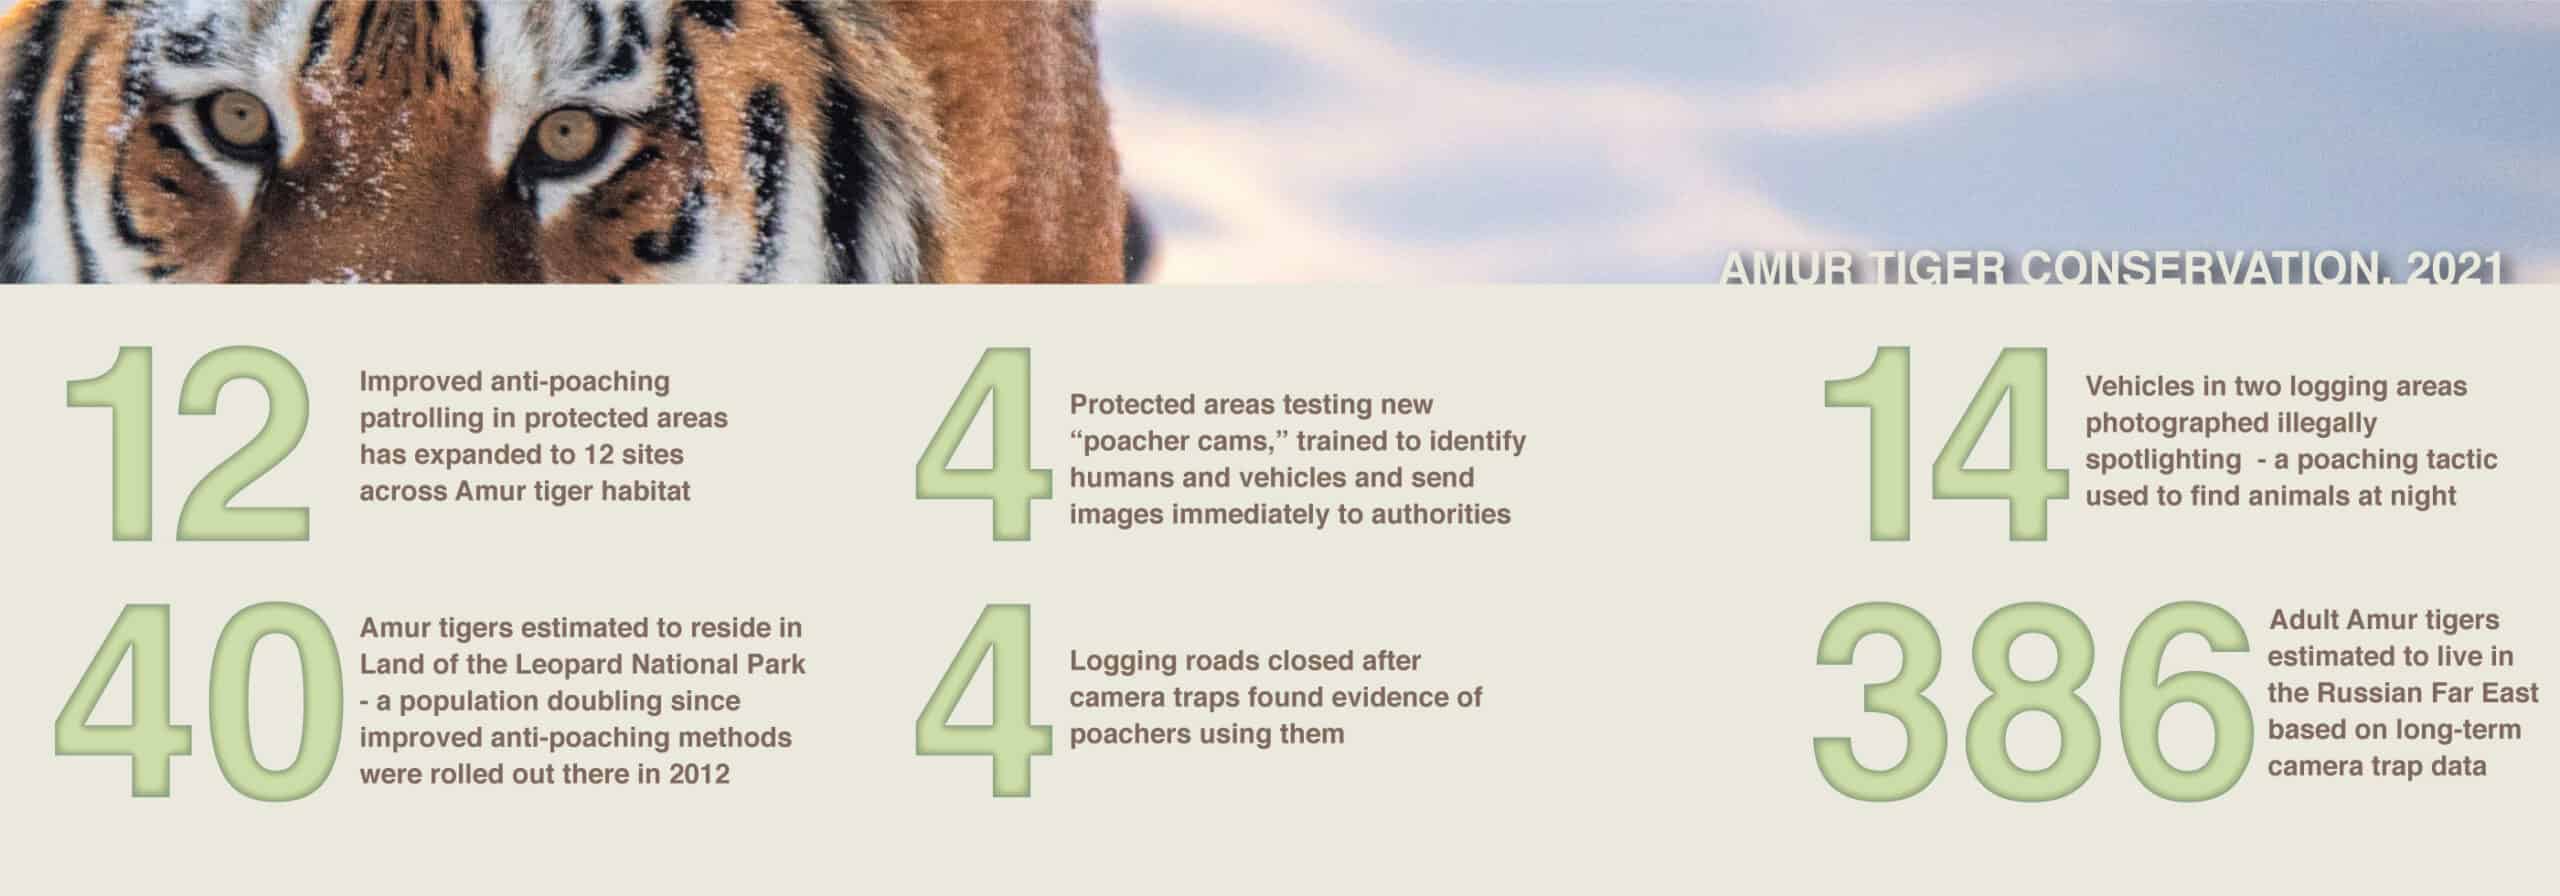 Tiger Conservation Annual Report 2021